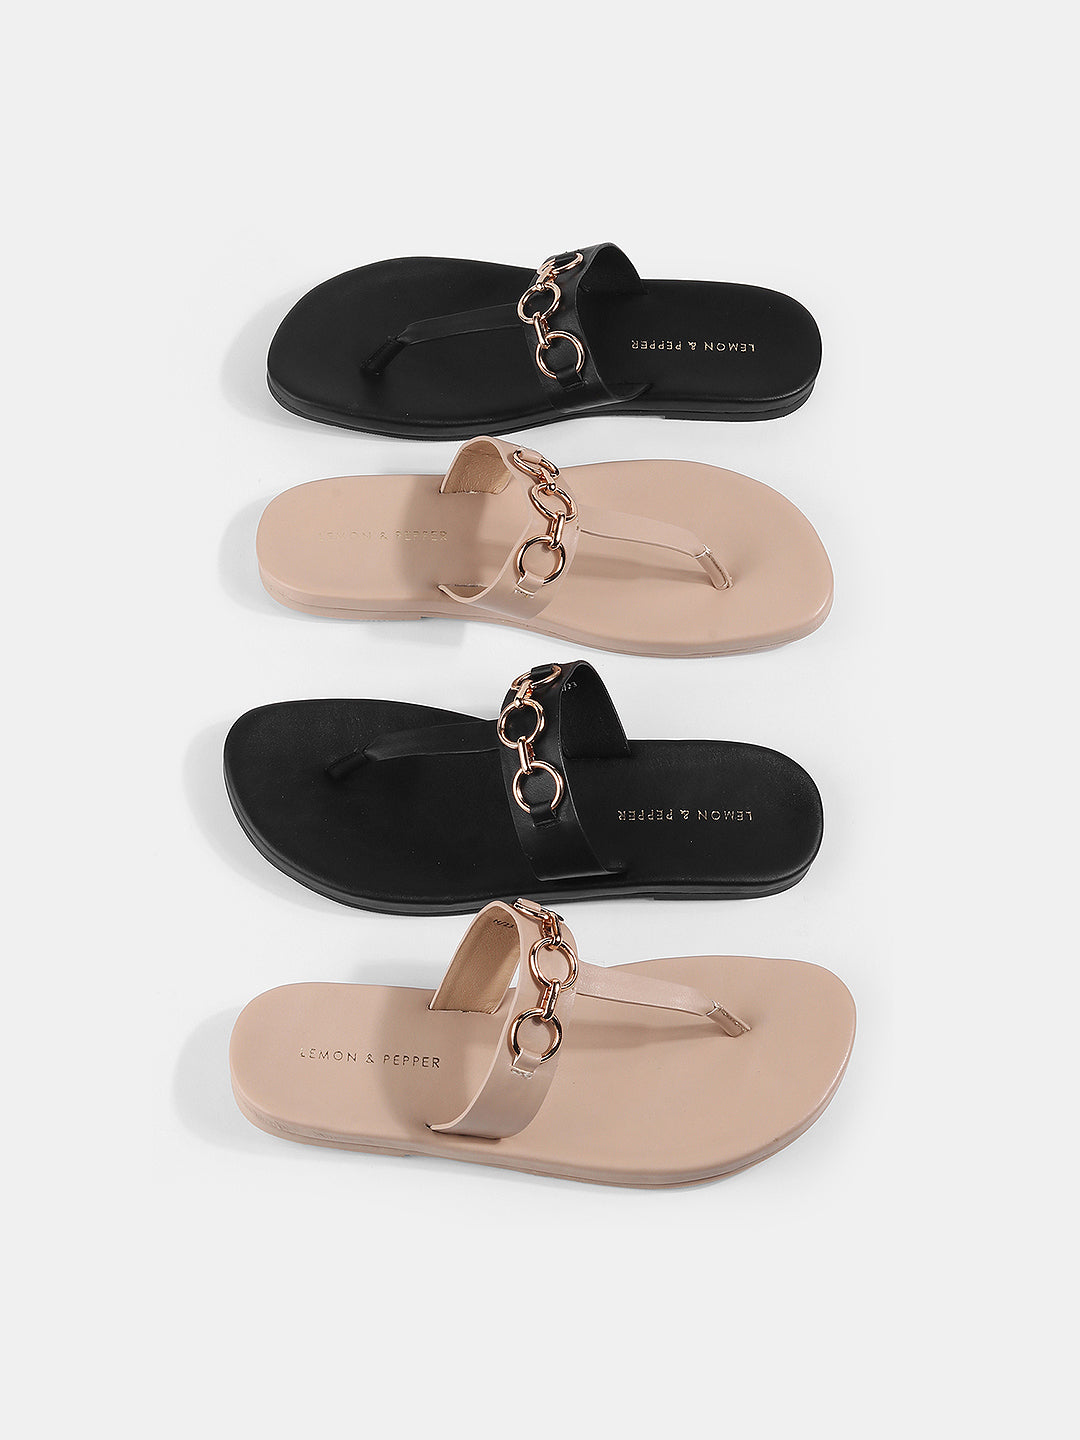 fcity.in - Hunyza Footwear Flat Sandals For Women Or Stylish Trendy Slippers